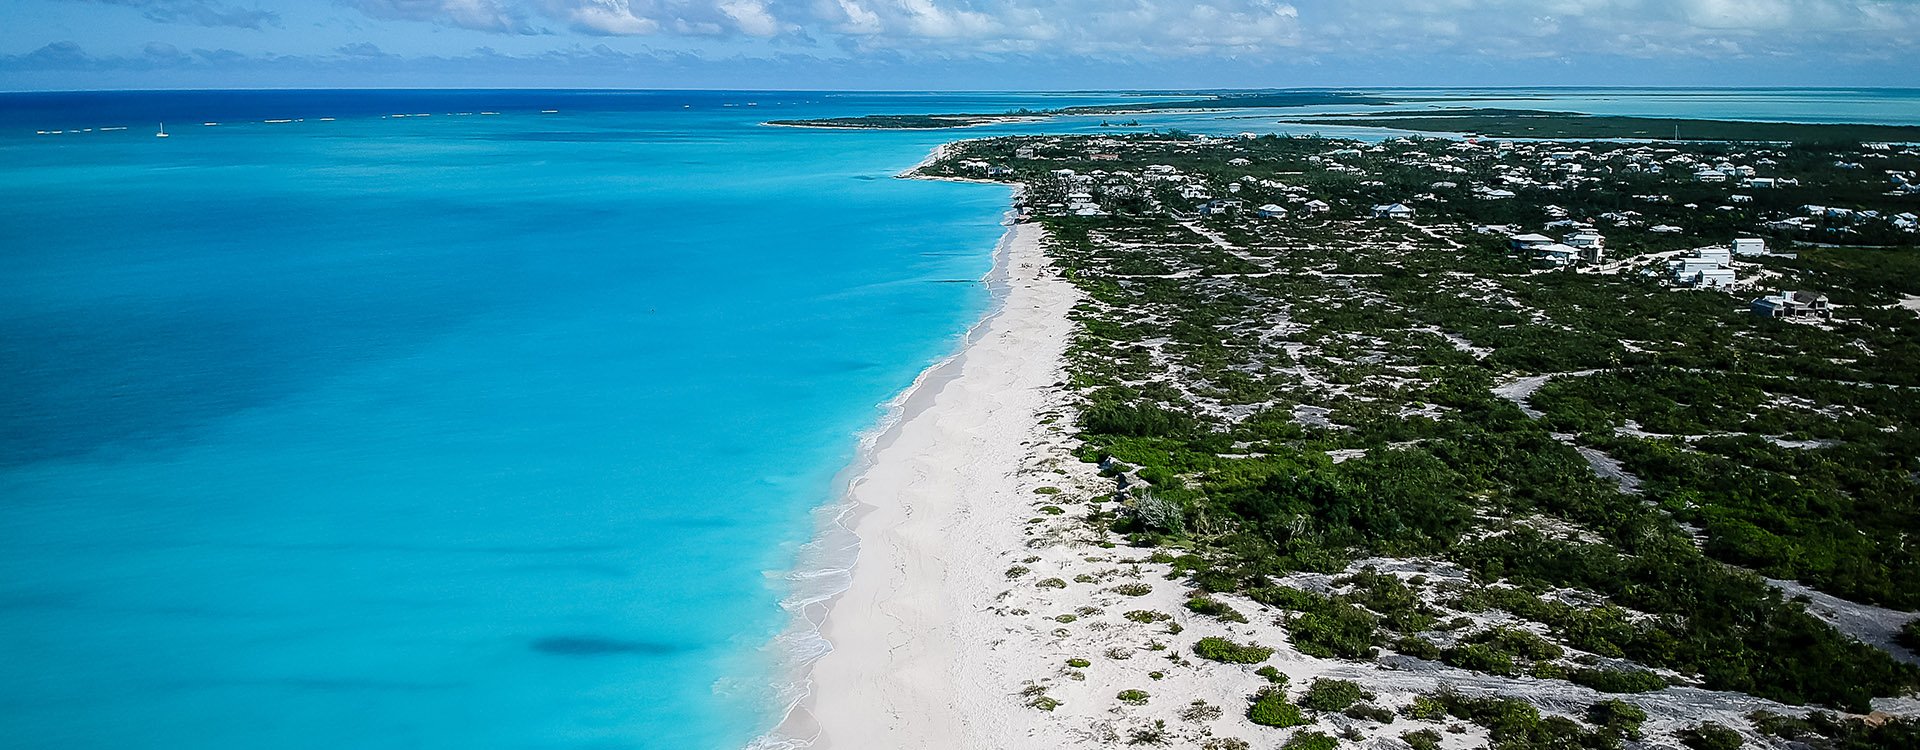 Drone photo Grace Bay beach, Providenciales, Turks and Caicos